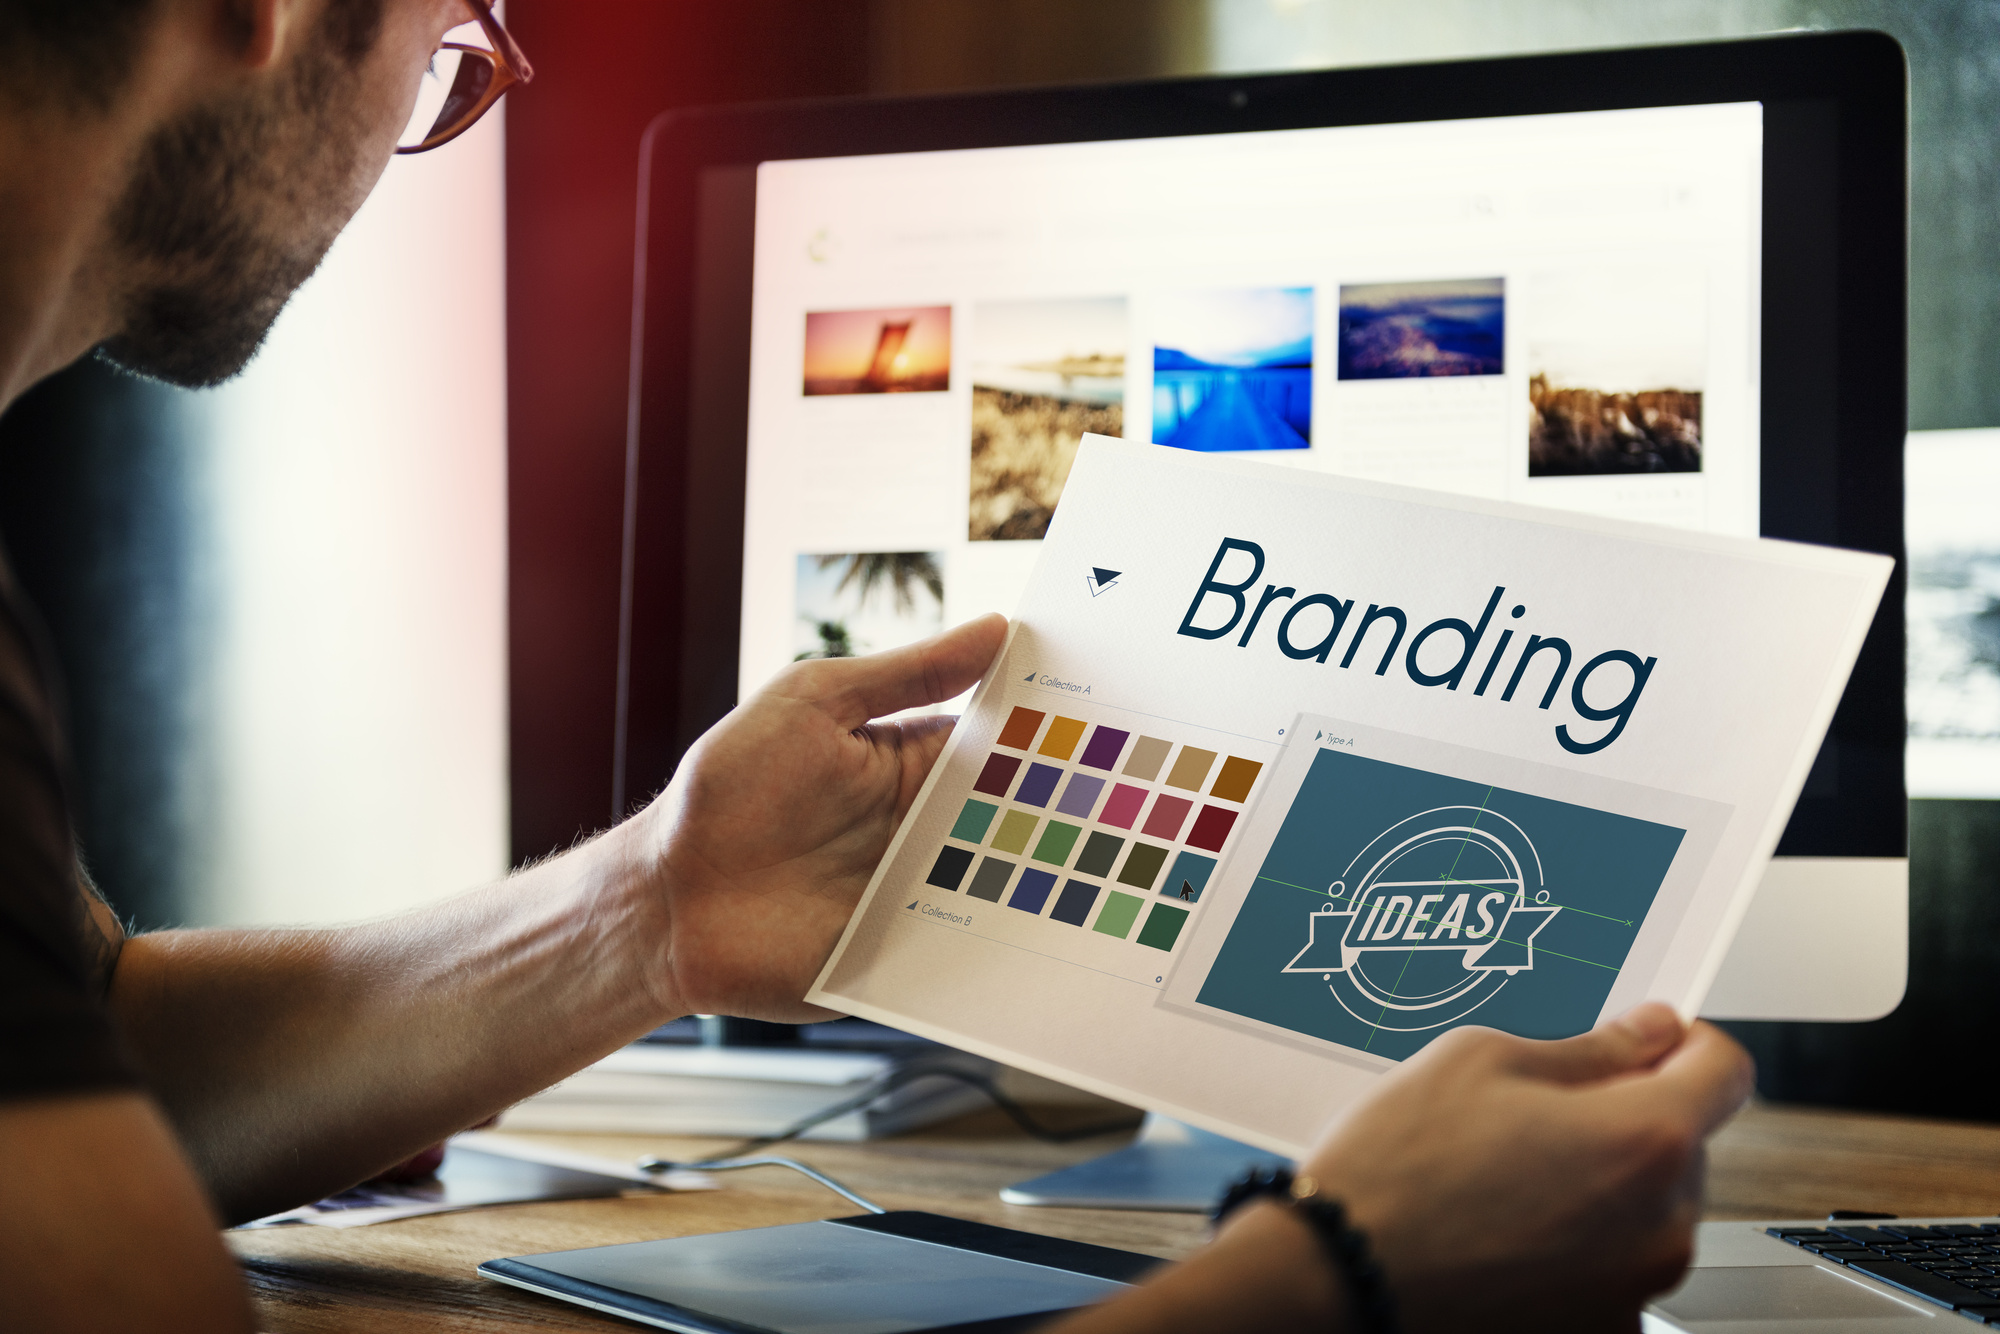 3 Creative Branding Ideas for Your Business